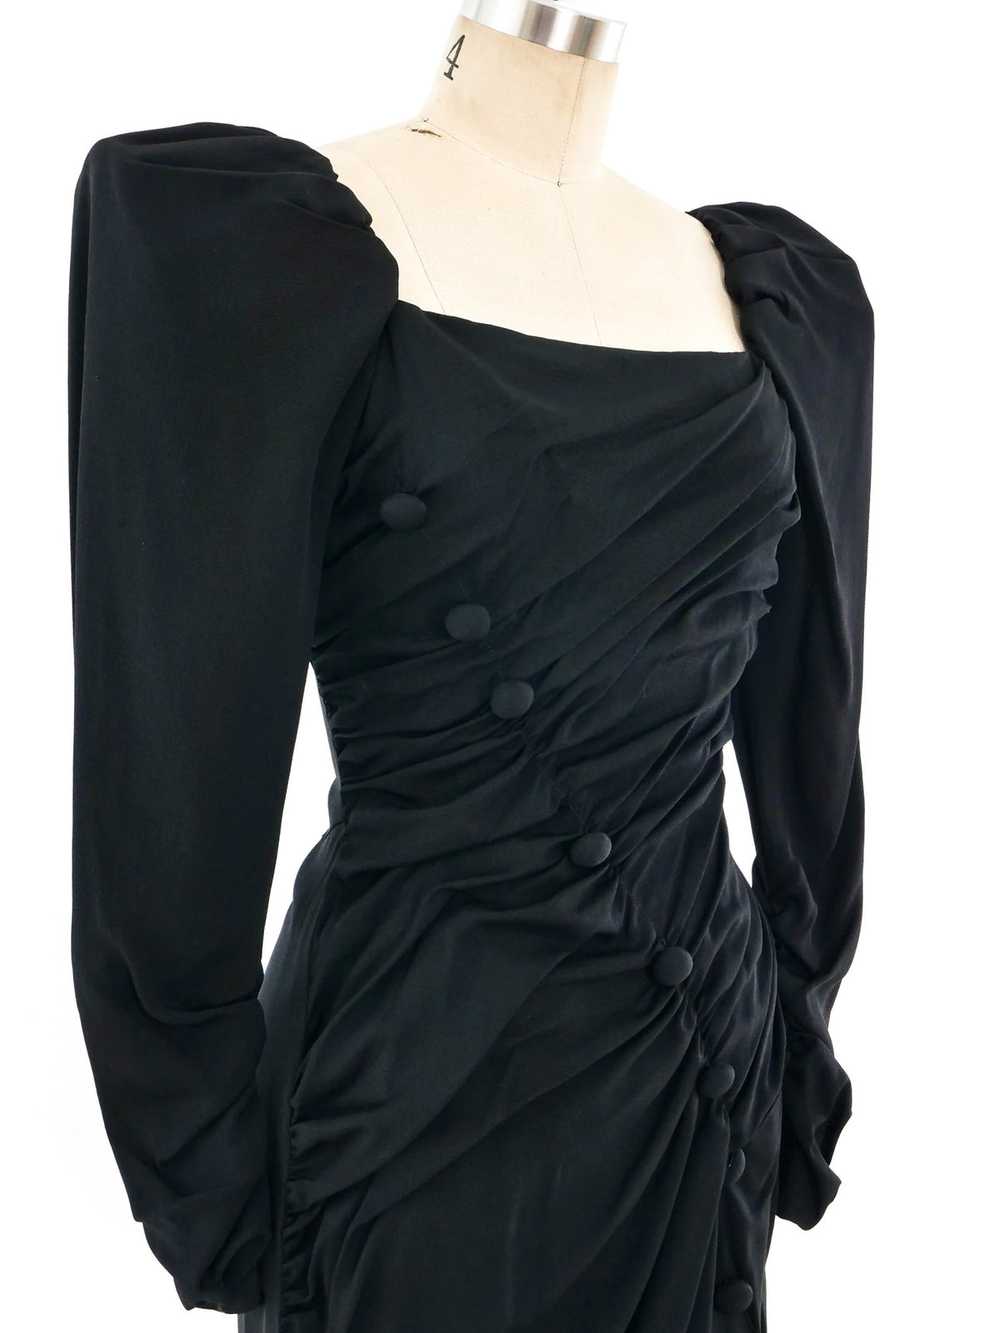 Arnold Scaasi Ruched Crepe Dress - image 3